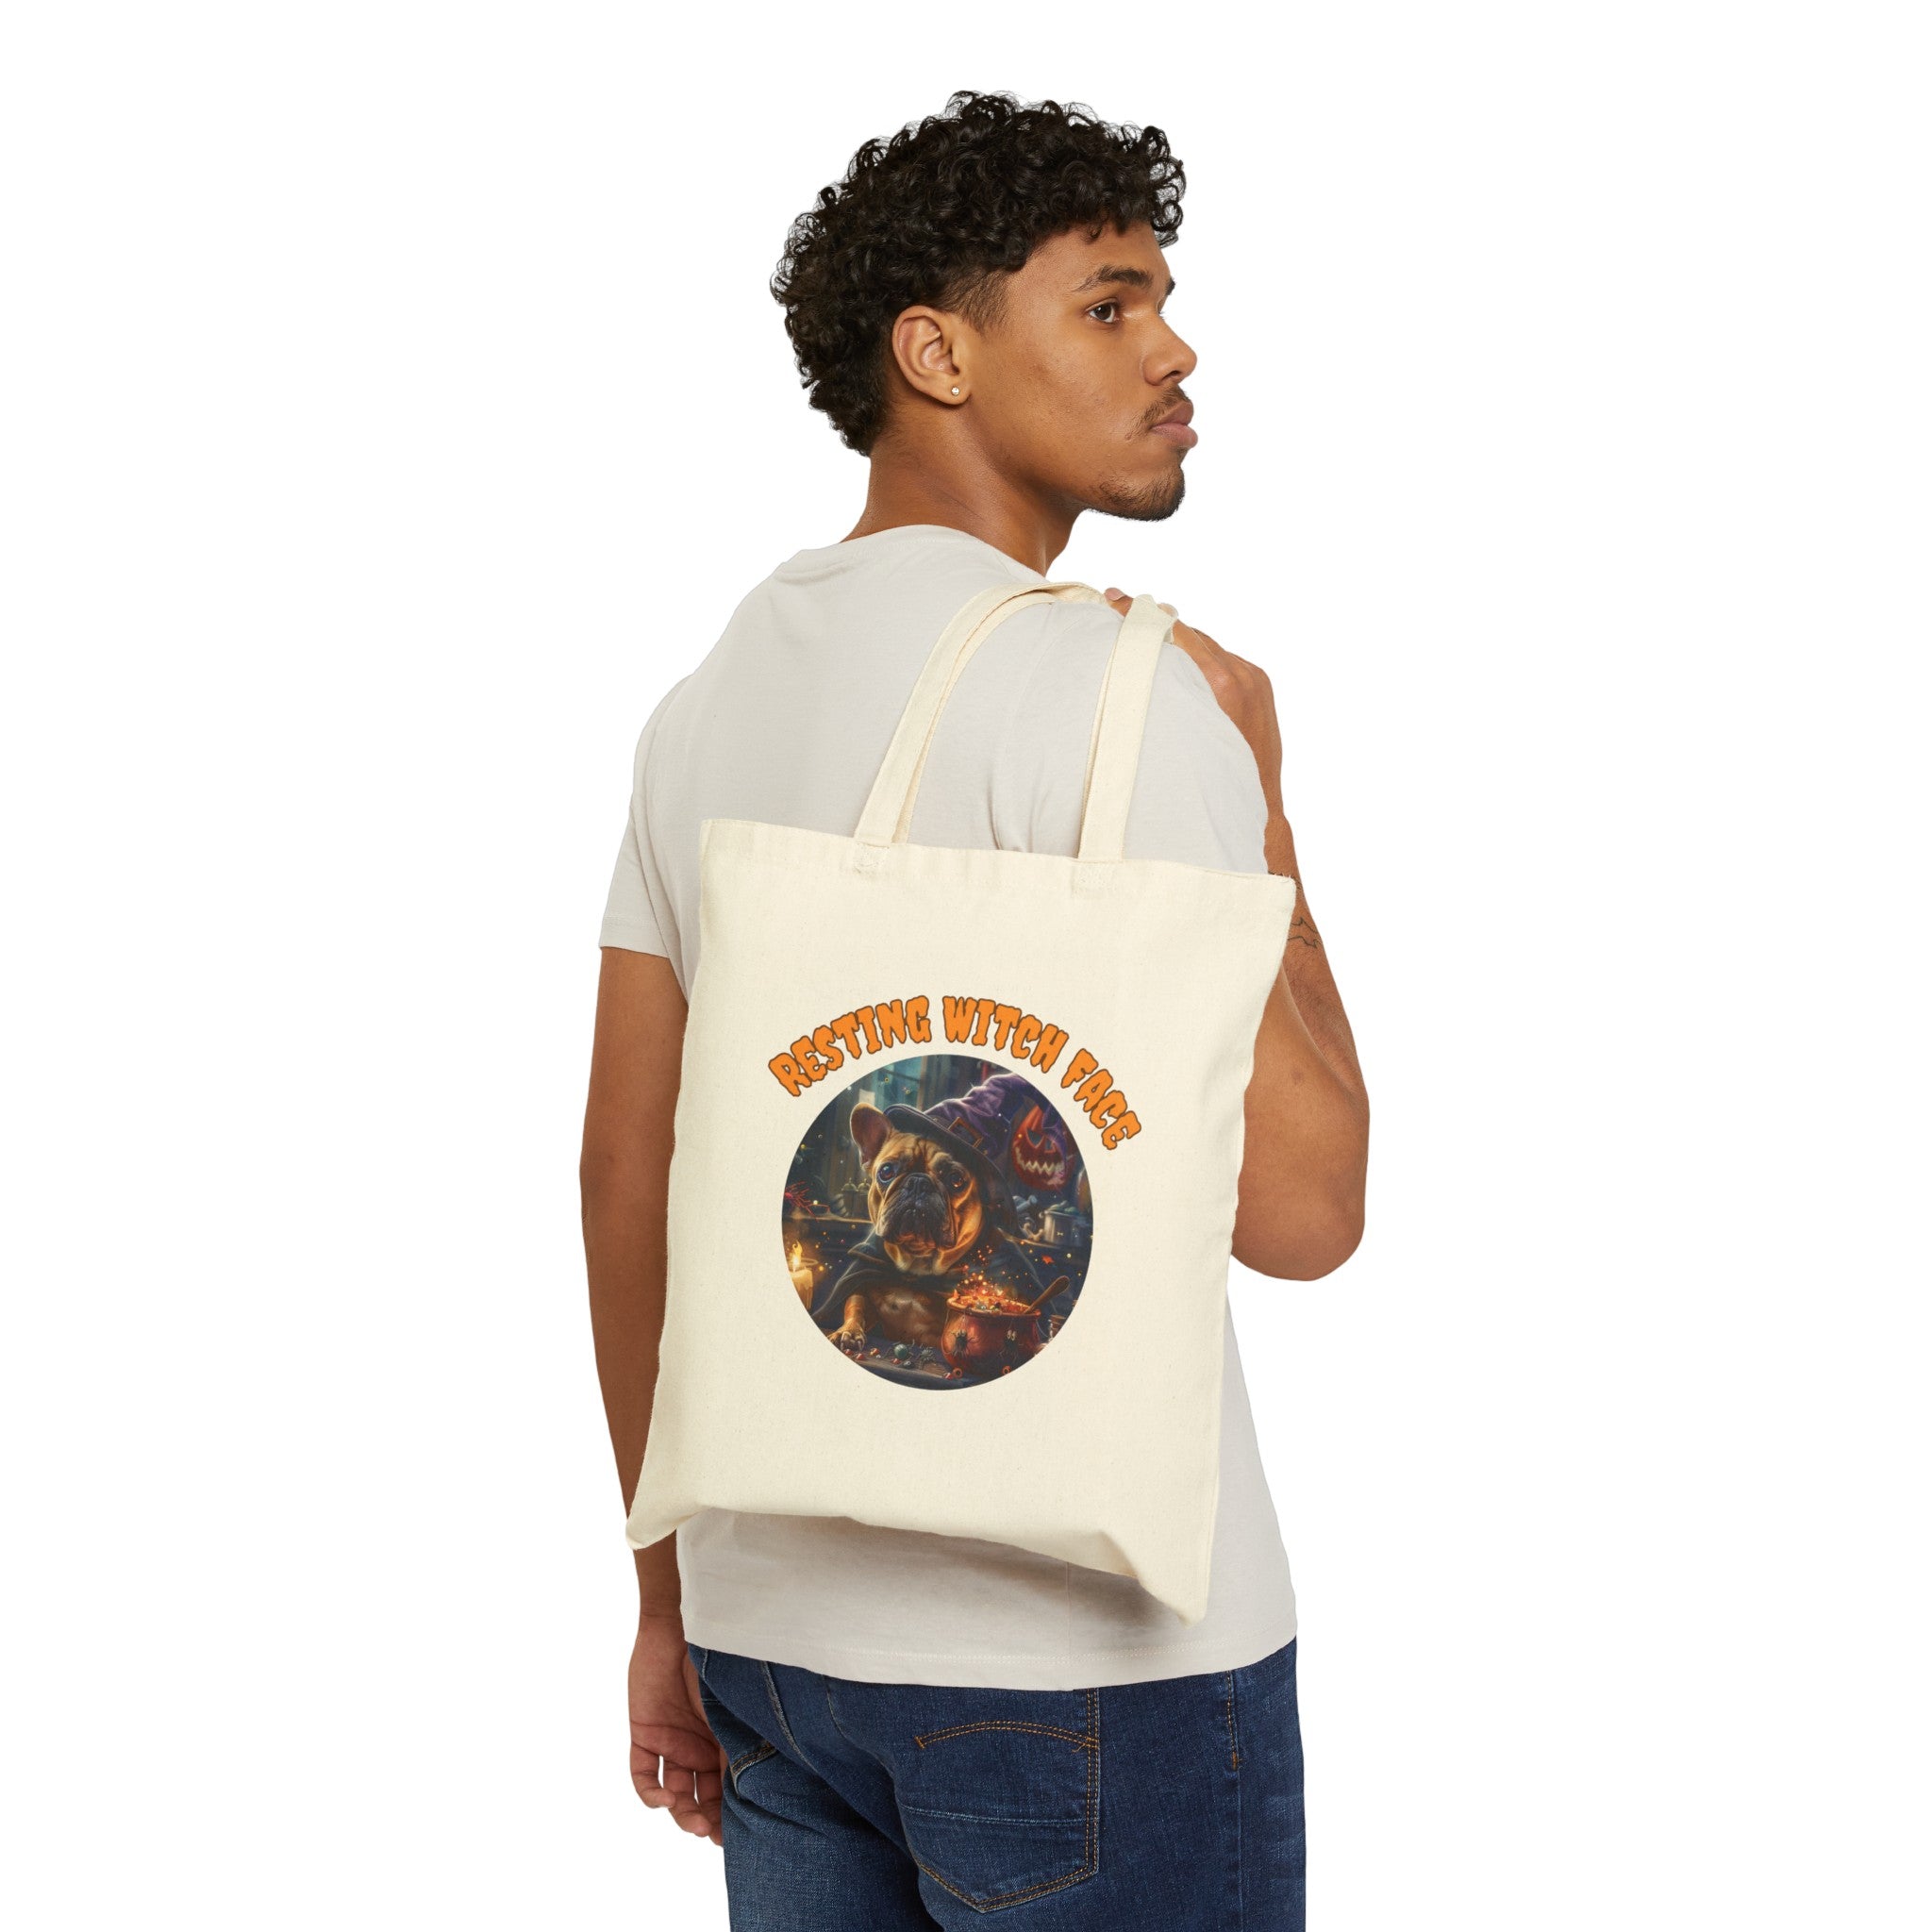 "Resting Witch Face" Trick or Treat Canvas Tote Bag (Tan/French)